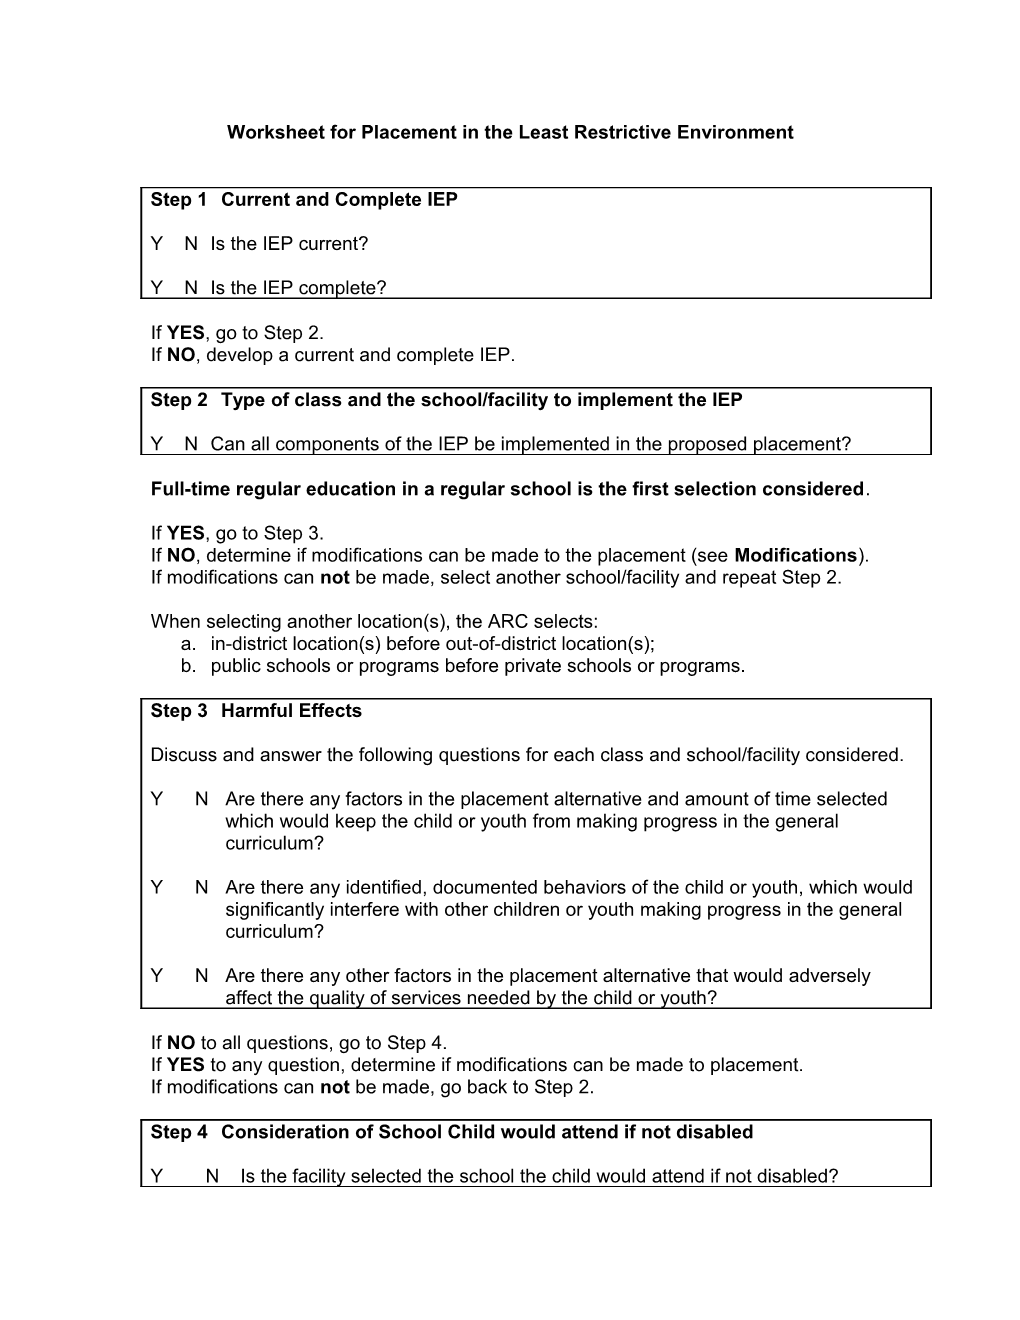 Worksheet for Placement in the Least Restrictive Environment